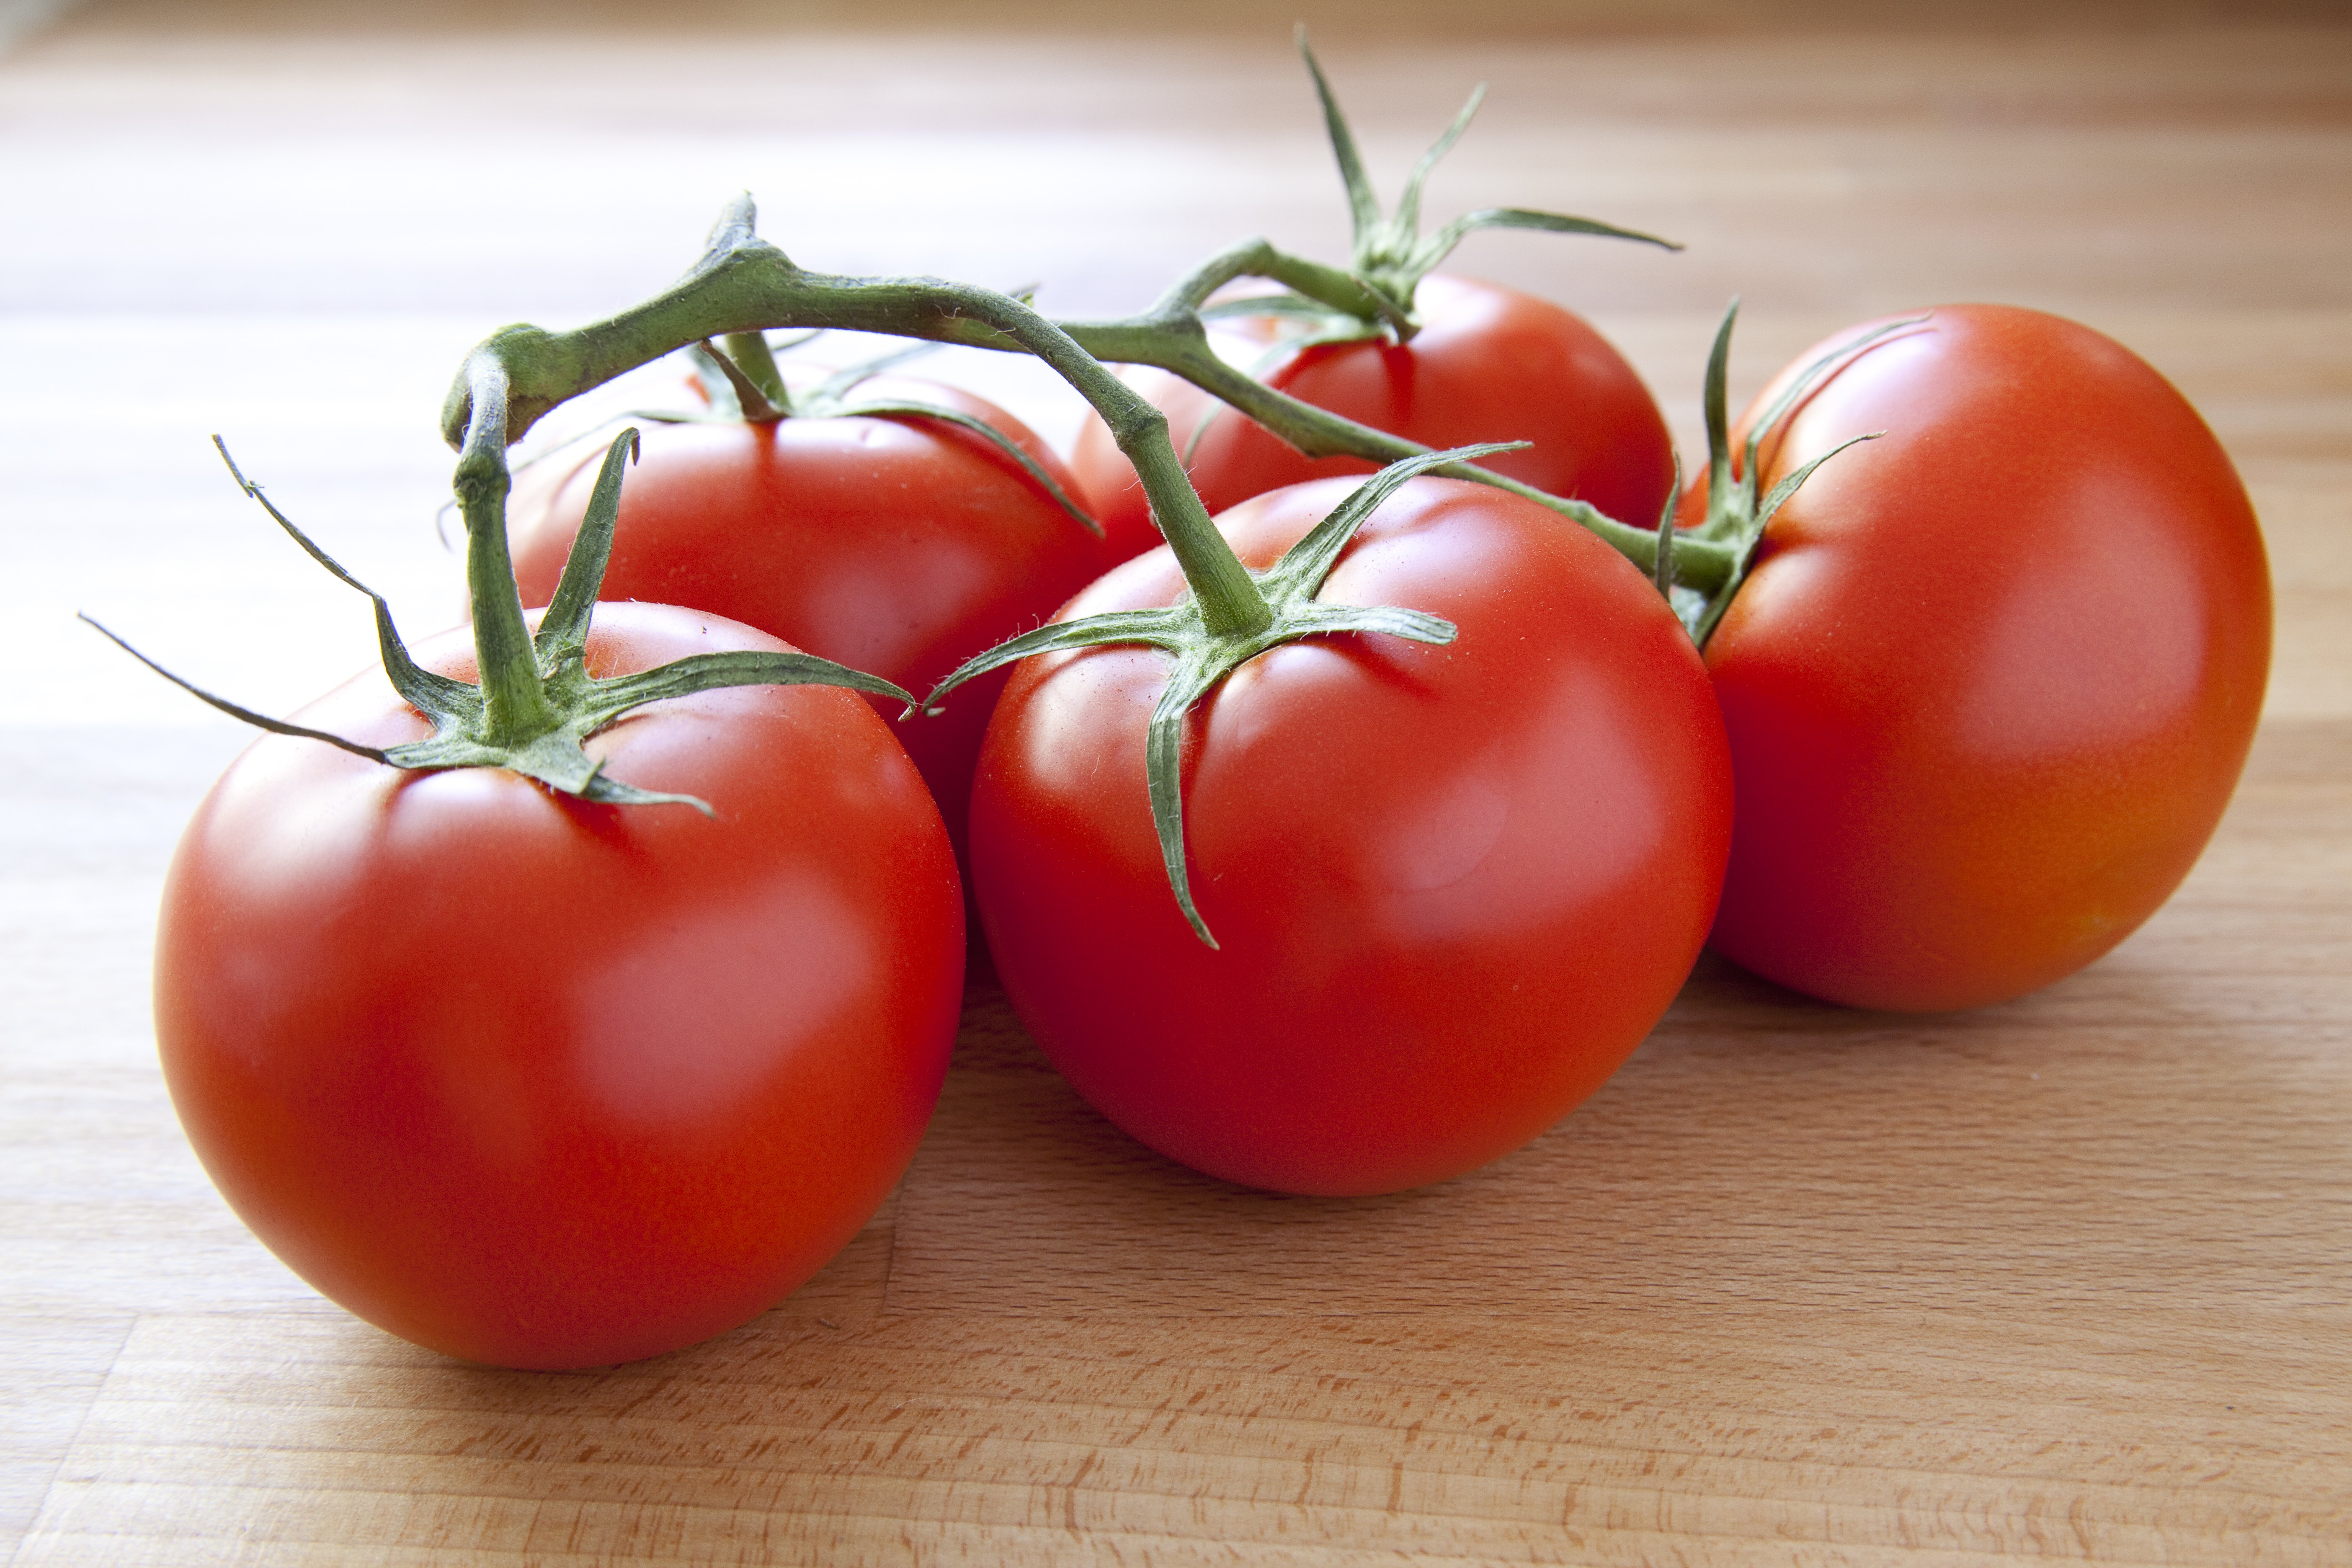 These are tomatoes. Томат Афина. Помидоры садовые. Томат Афина фото. Tomatoes, Fresh or Chilled.